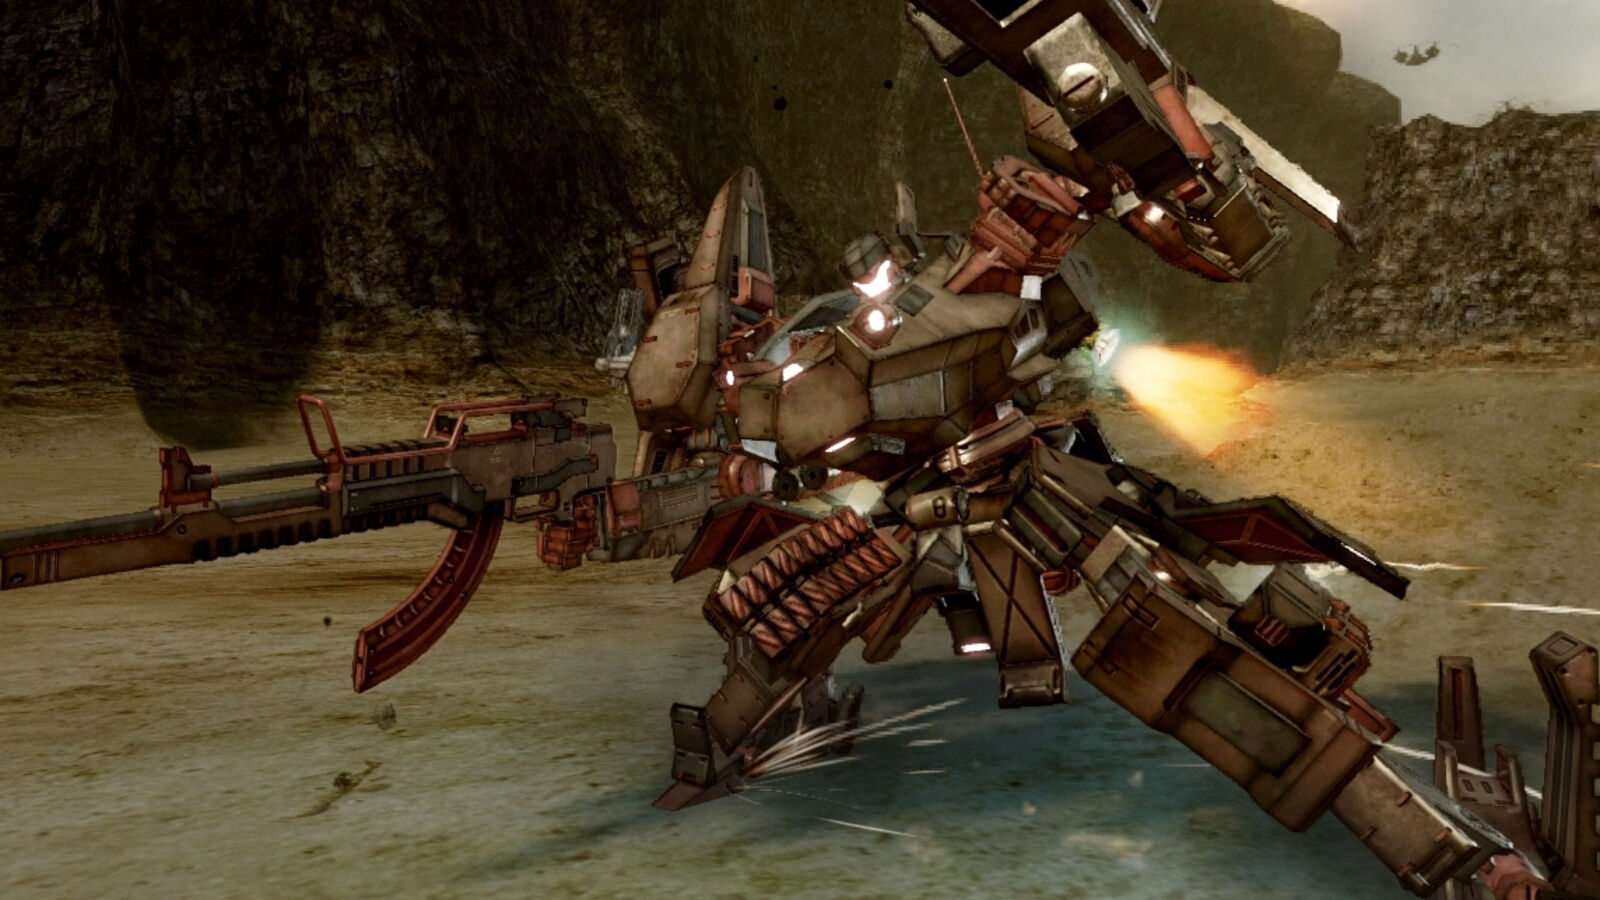 FromSoftware announced new Armored Core game at The Game Awards